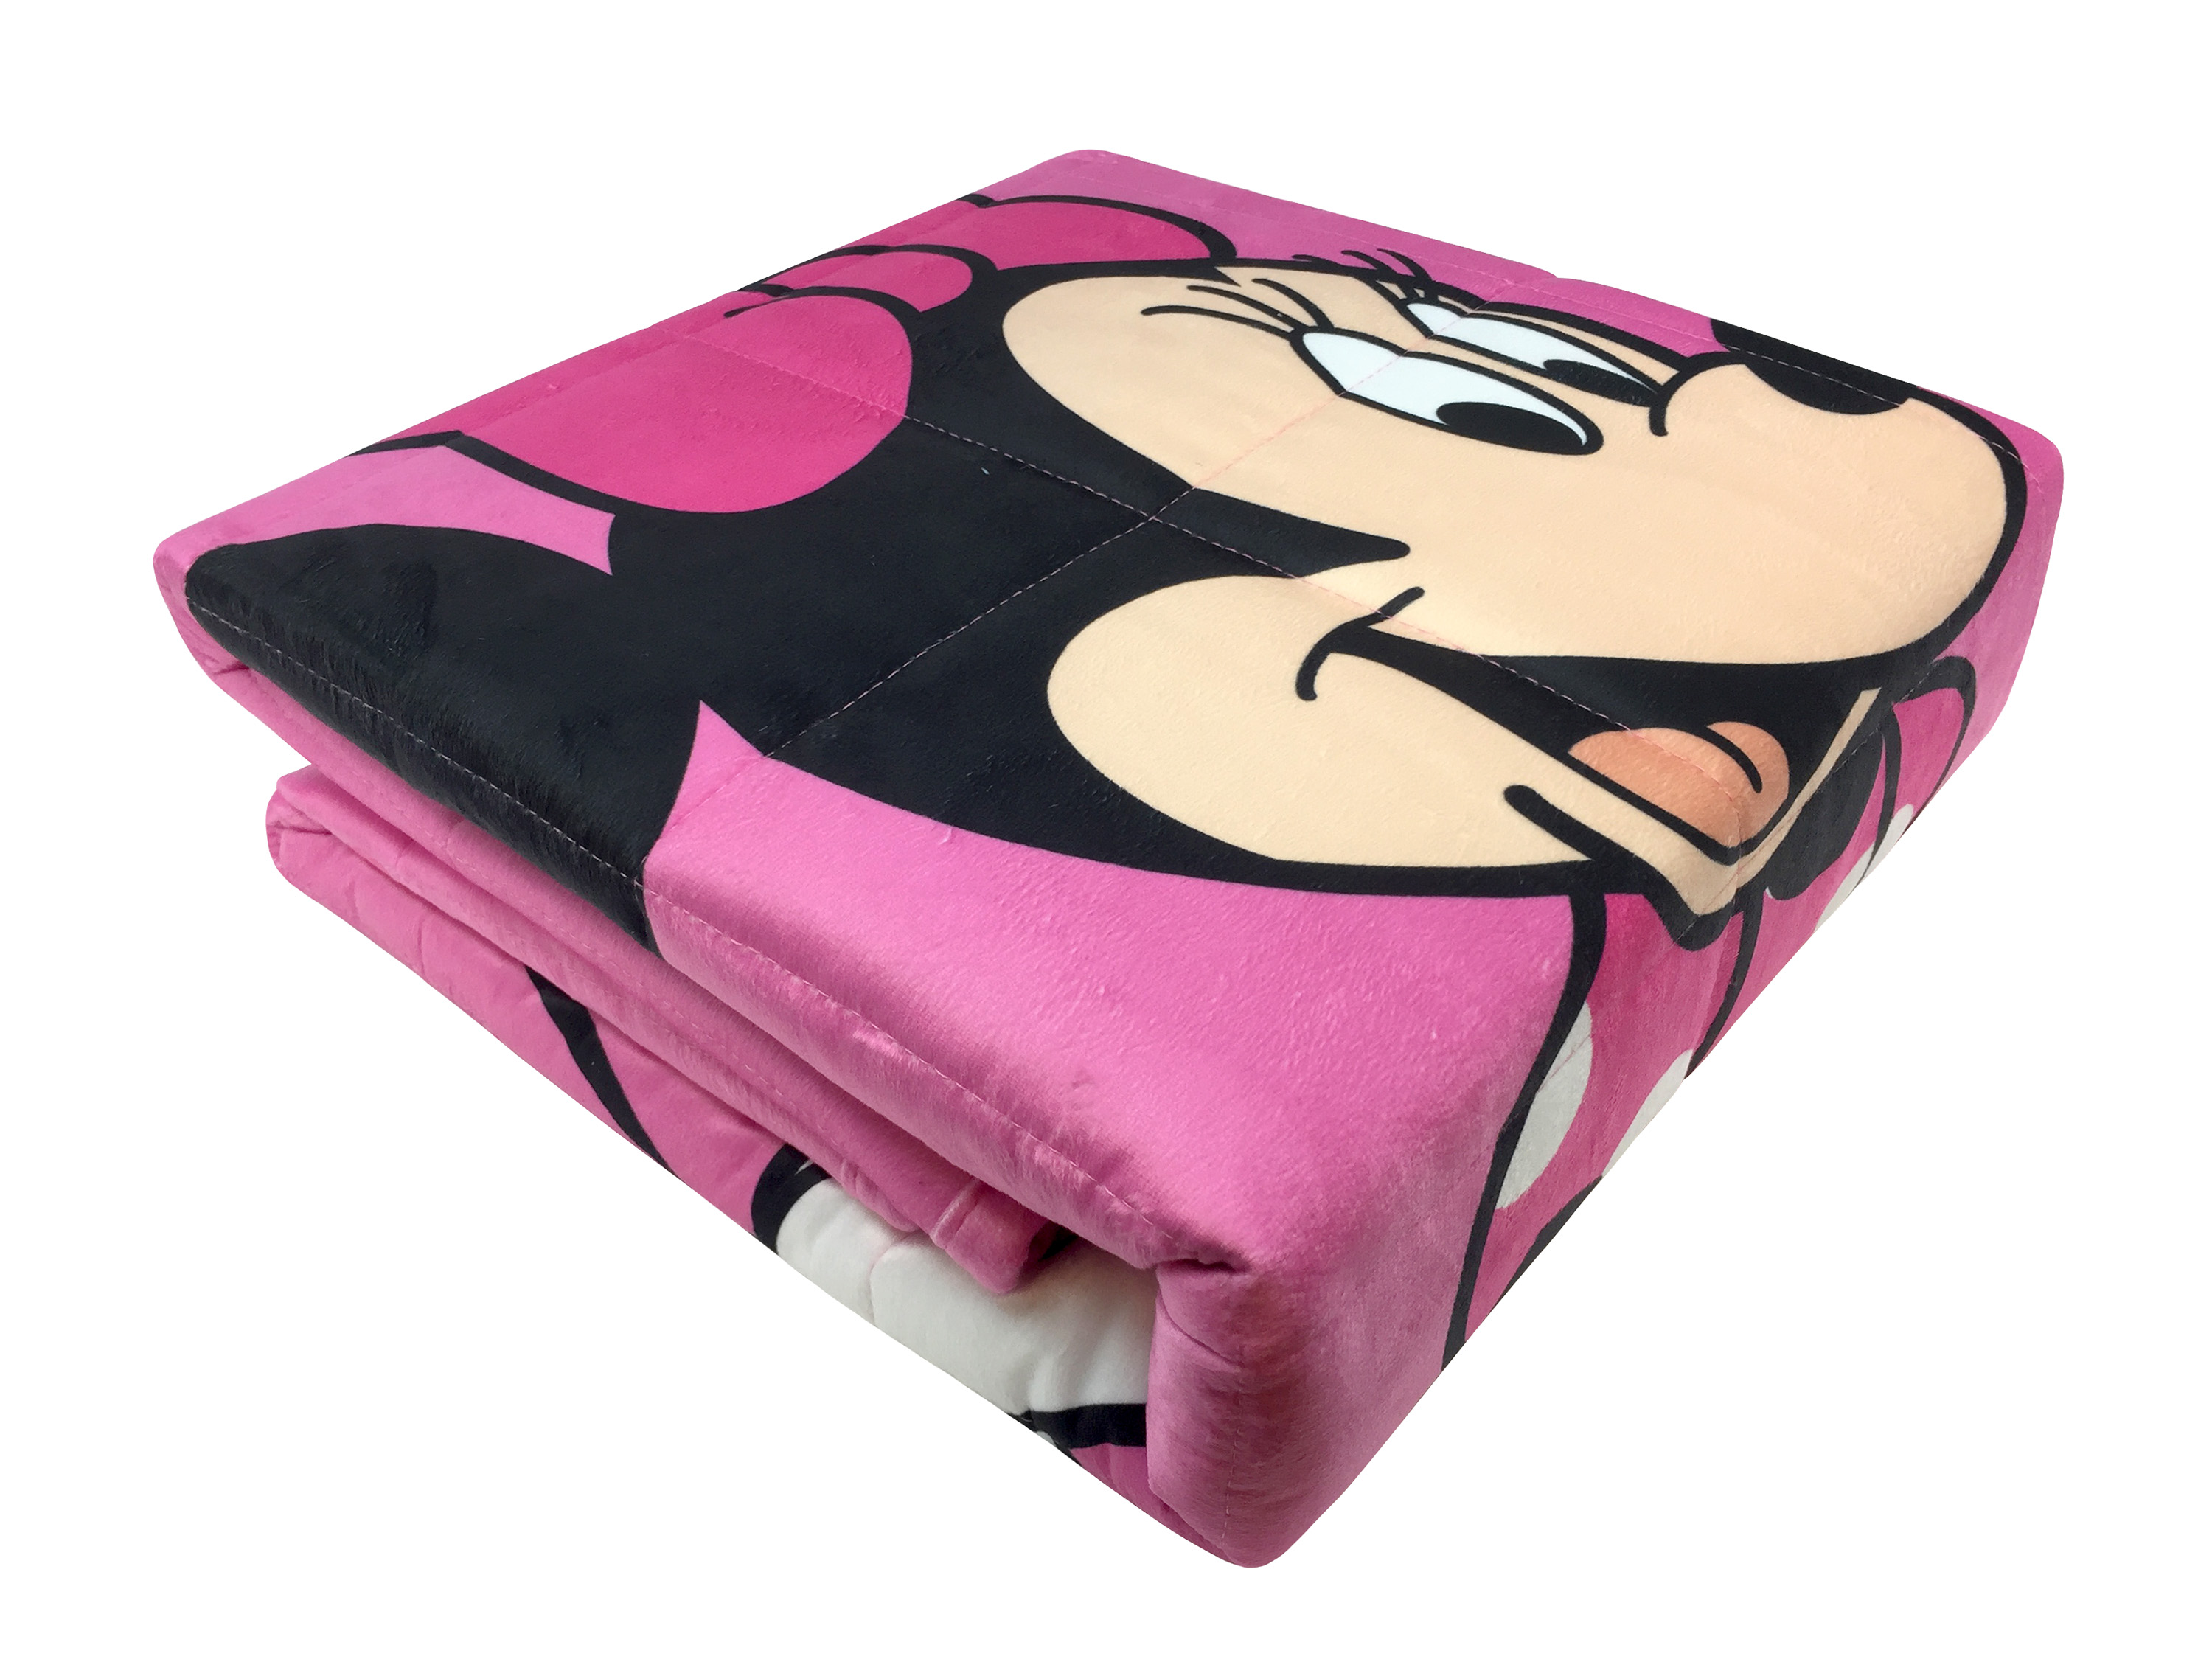 Disney Minnie Mouse 4.5 Pounds Weighted Blanket - image 2 of 3